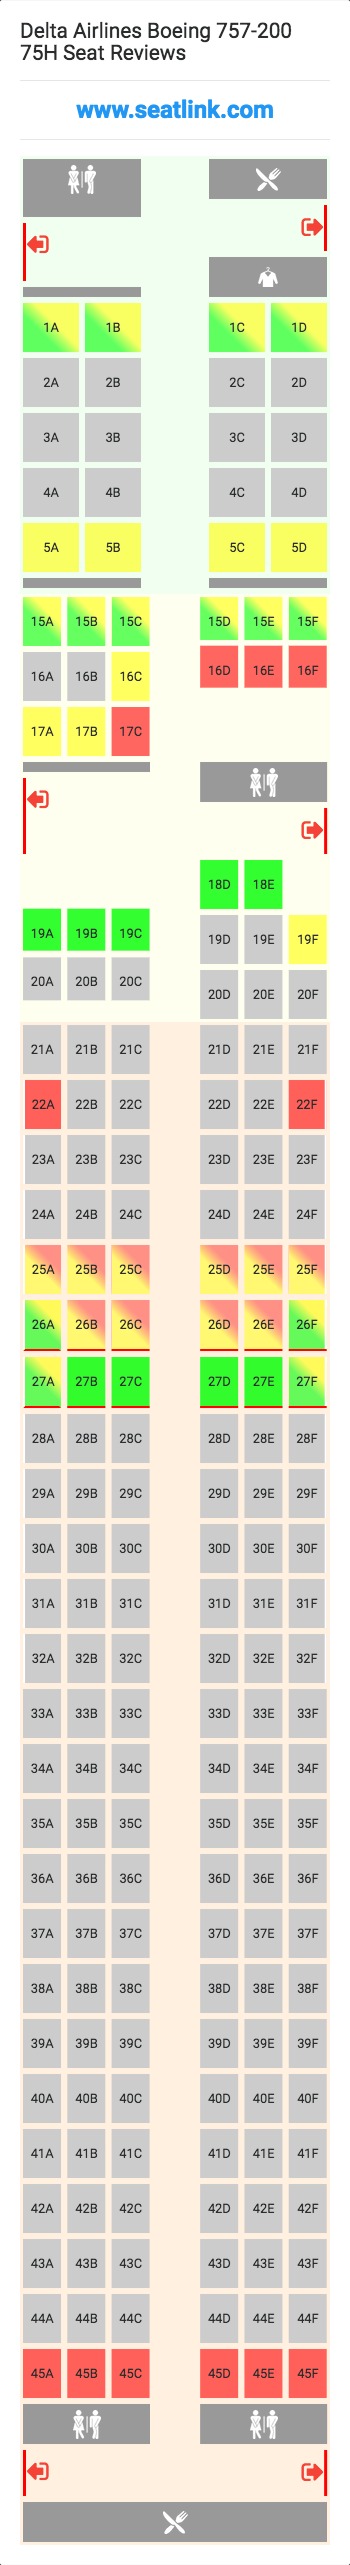 Delta Boeing 757 Jet Seating Chart